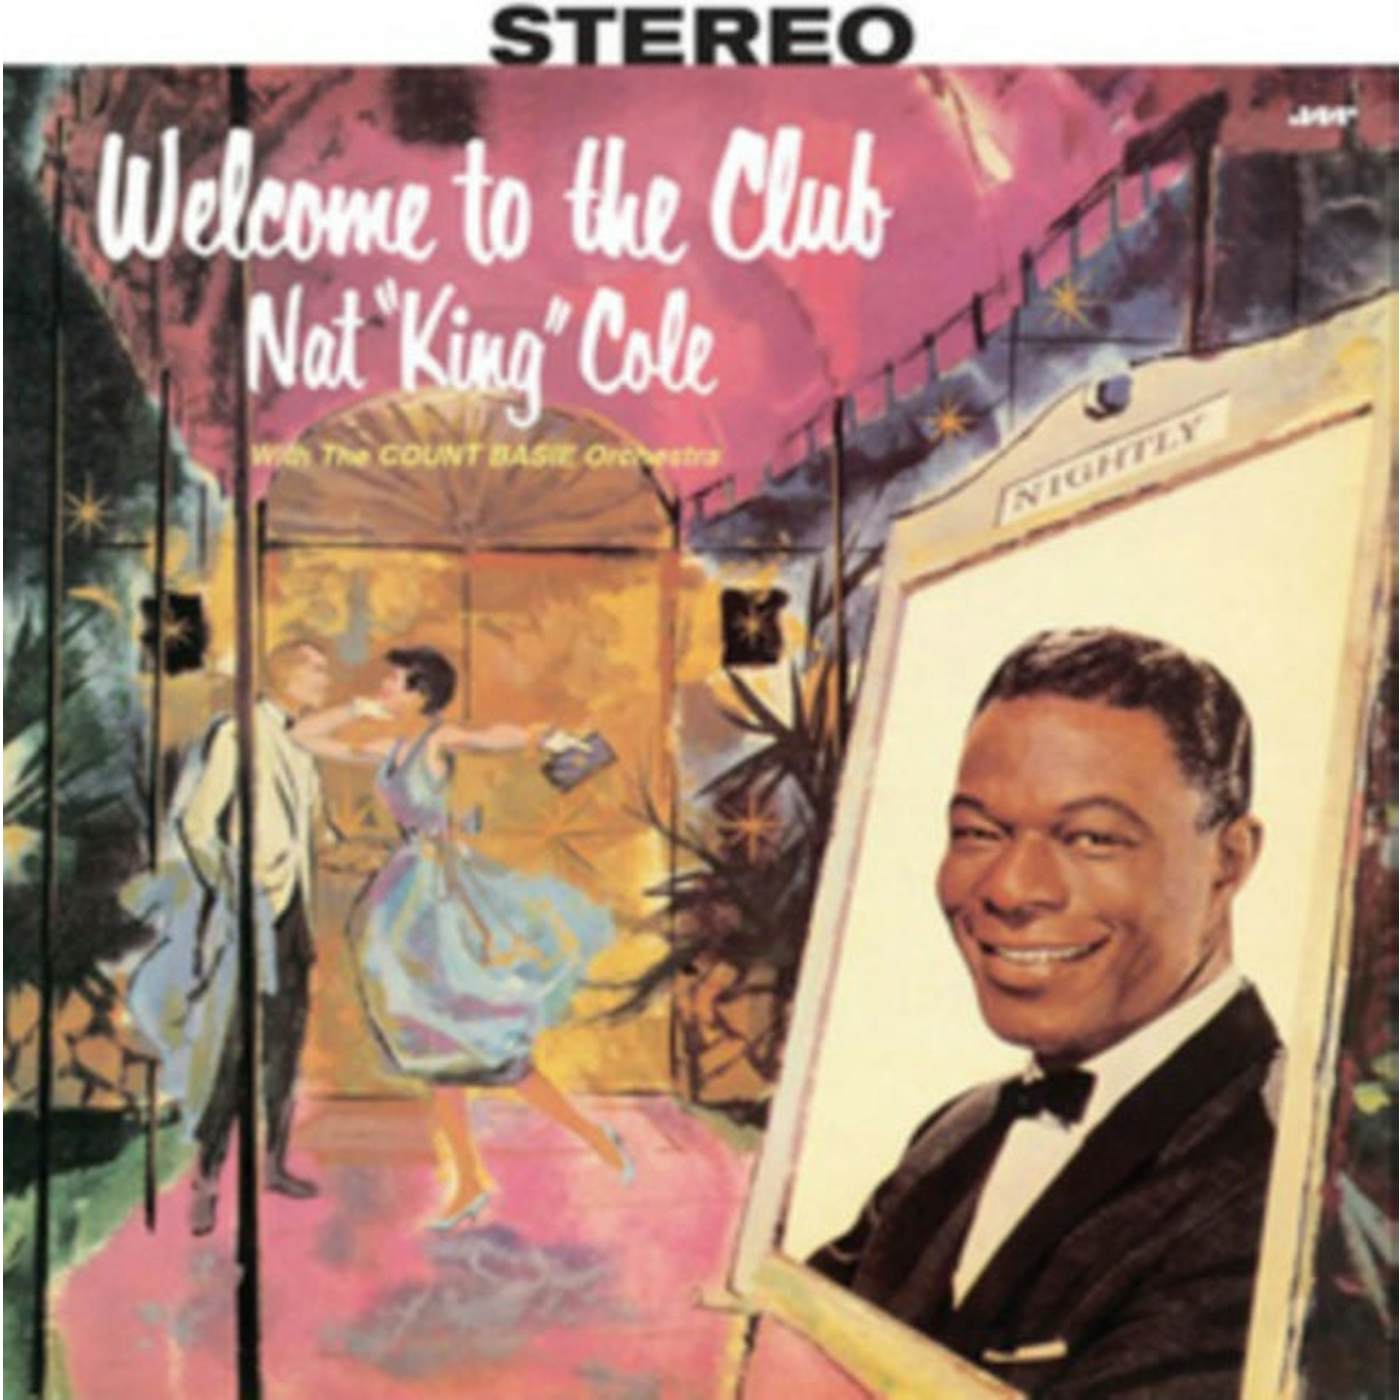 Nat King Cole LP Vinyl Record  Welcome To The Club (With The Count Basie Orchestra)